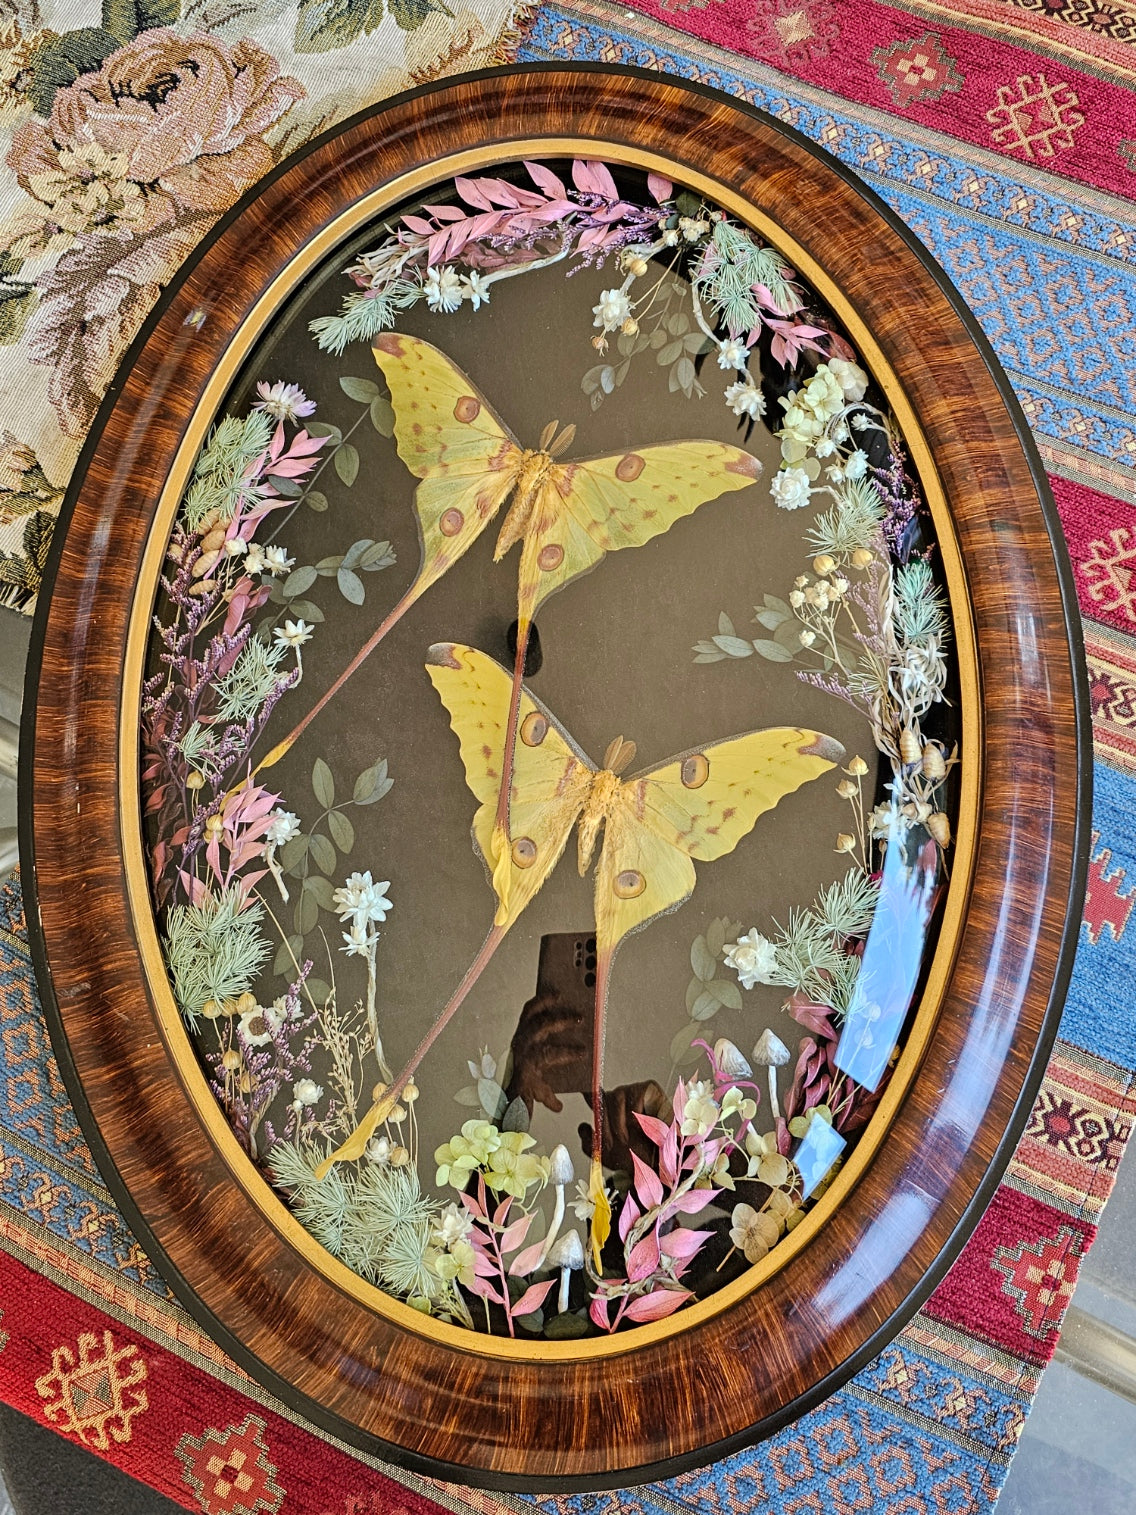 Giant Comet Moths in a Vintage Victorian Gothic bubble frame